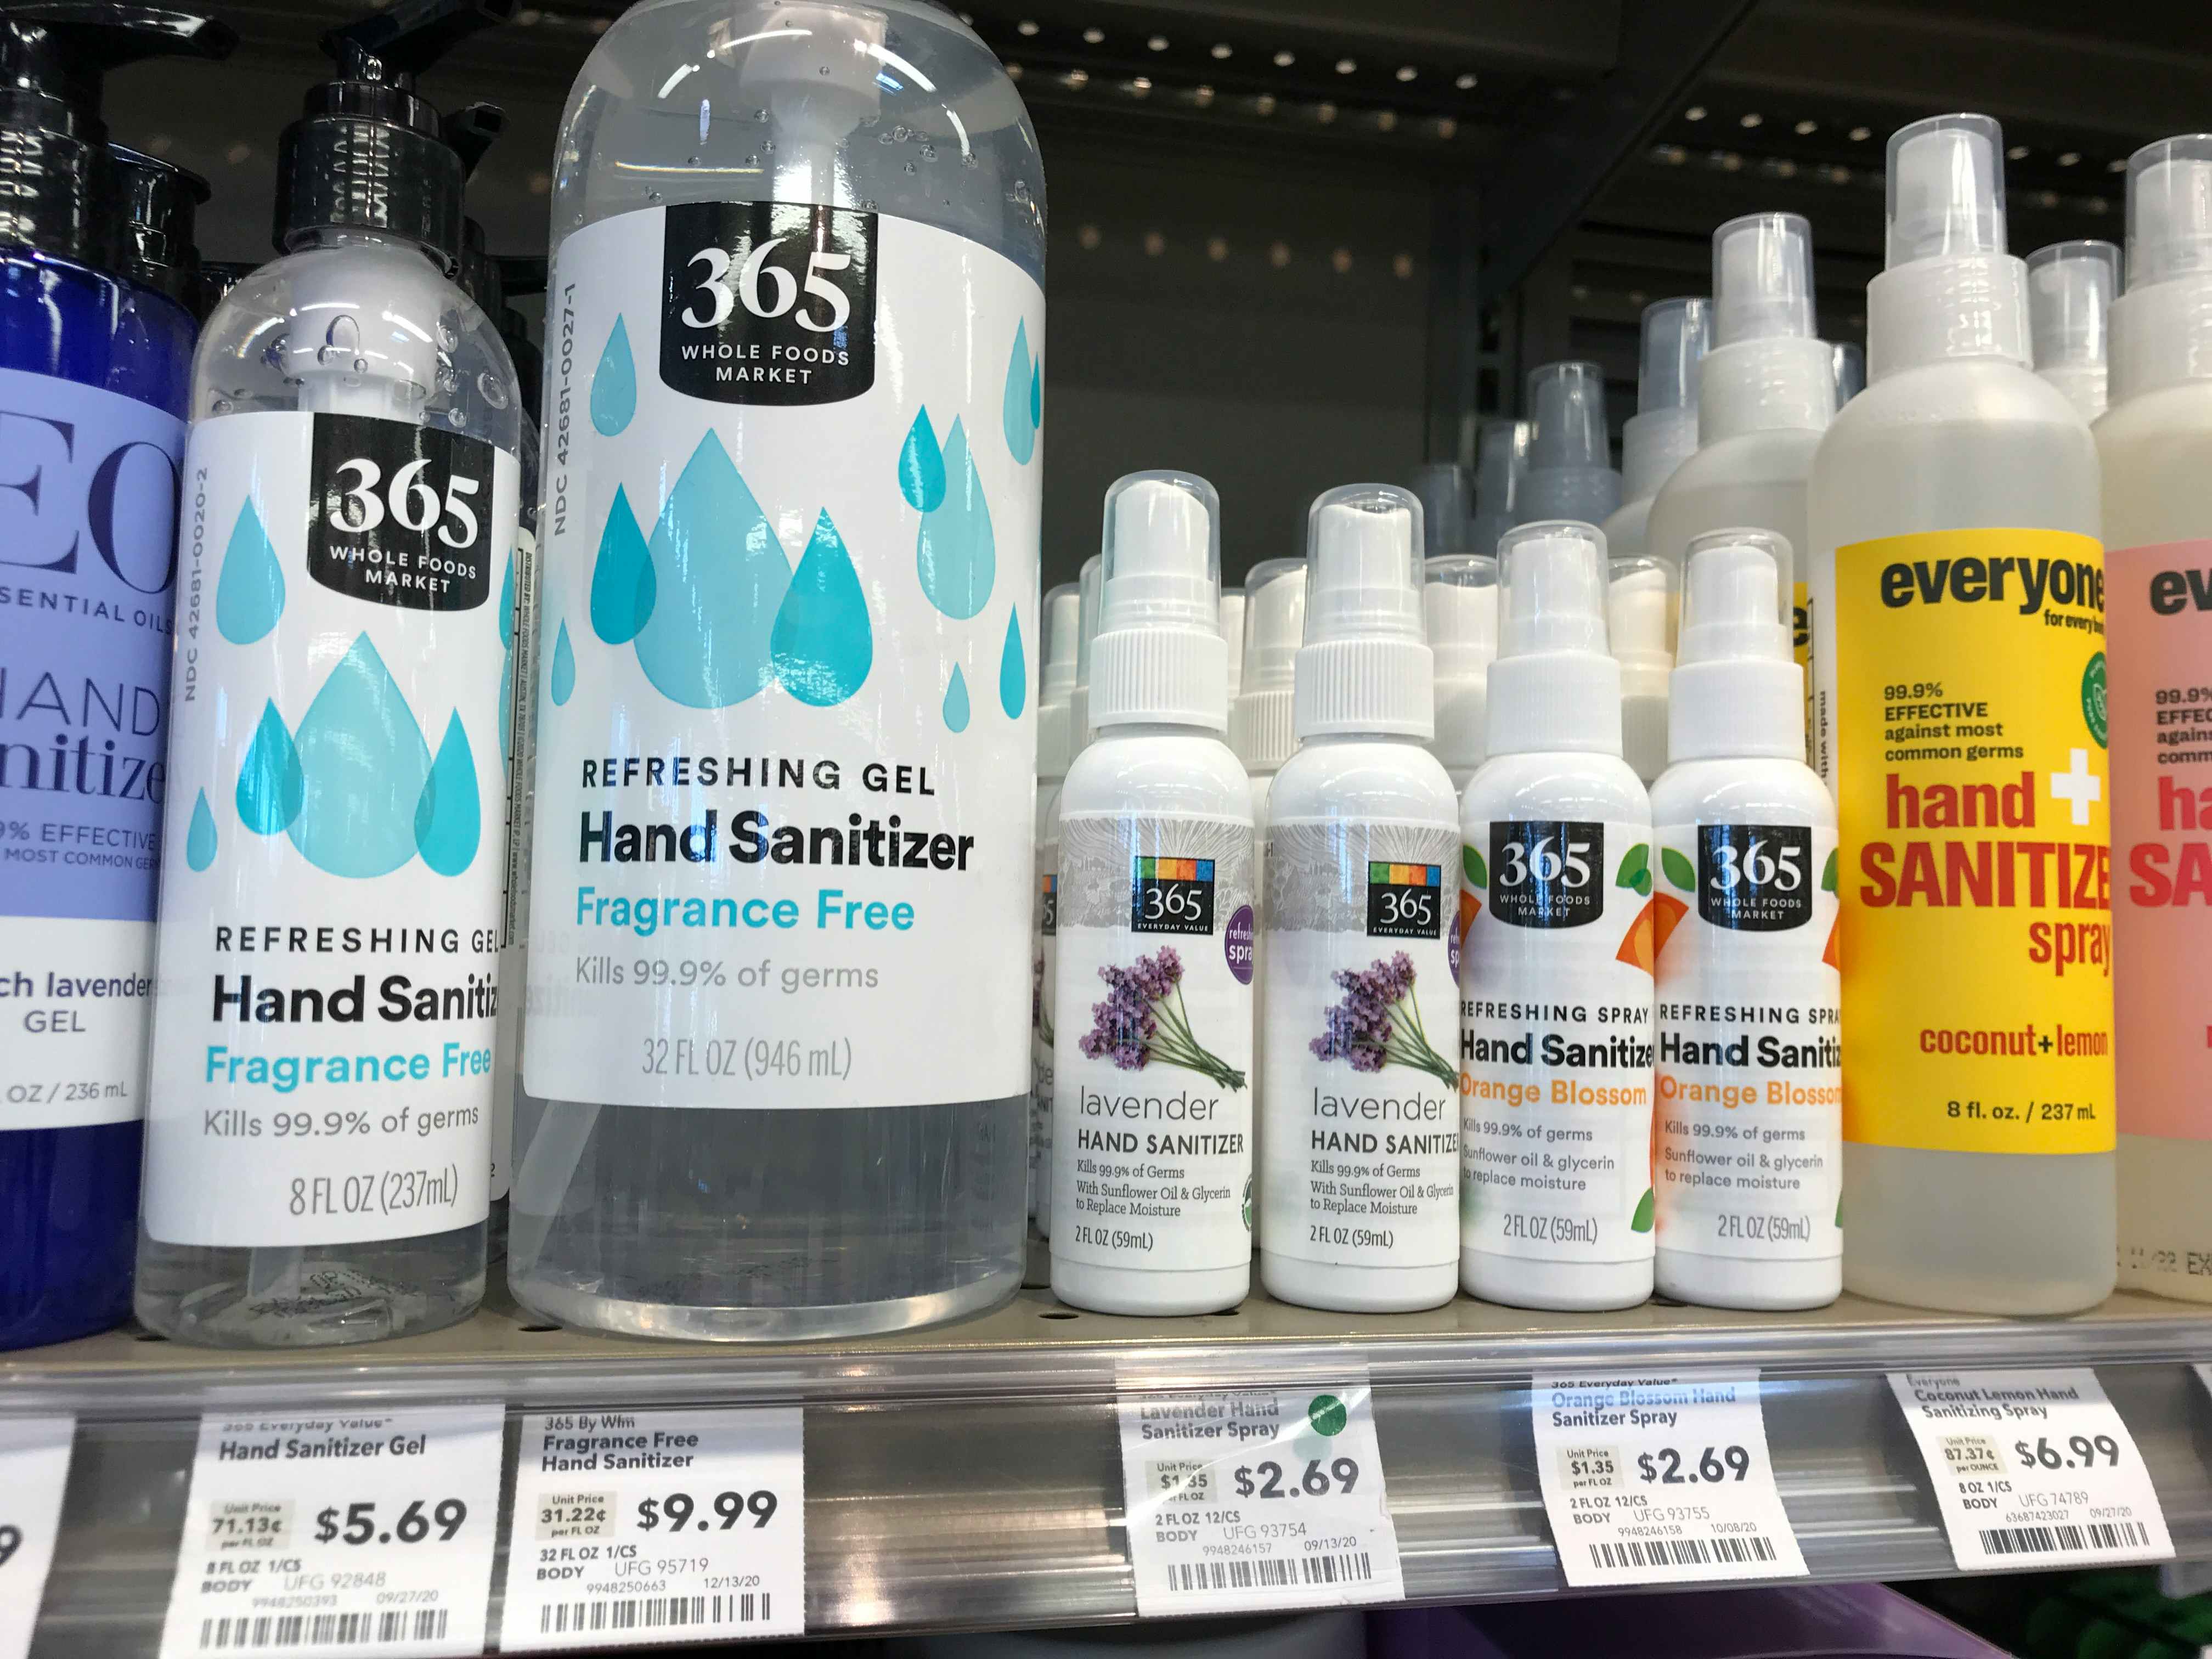 Whole Foods 365 brand hand sanitizer on the shelf.